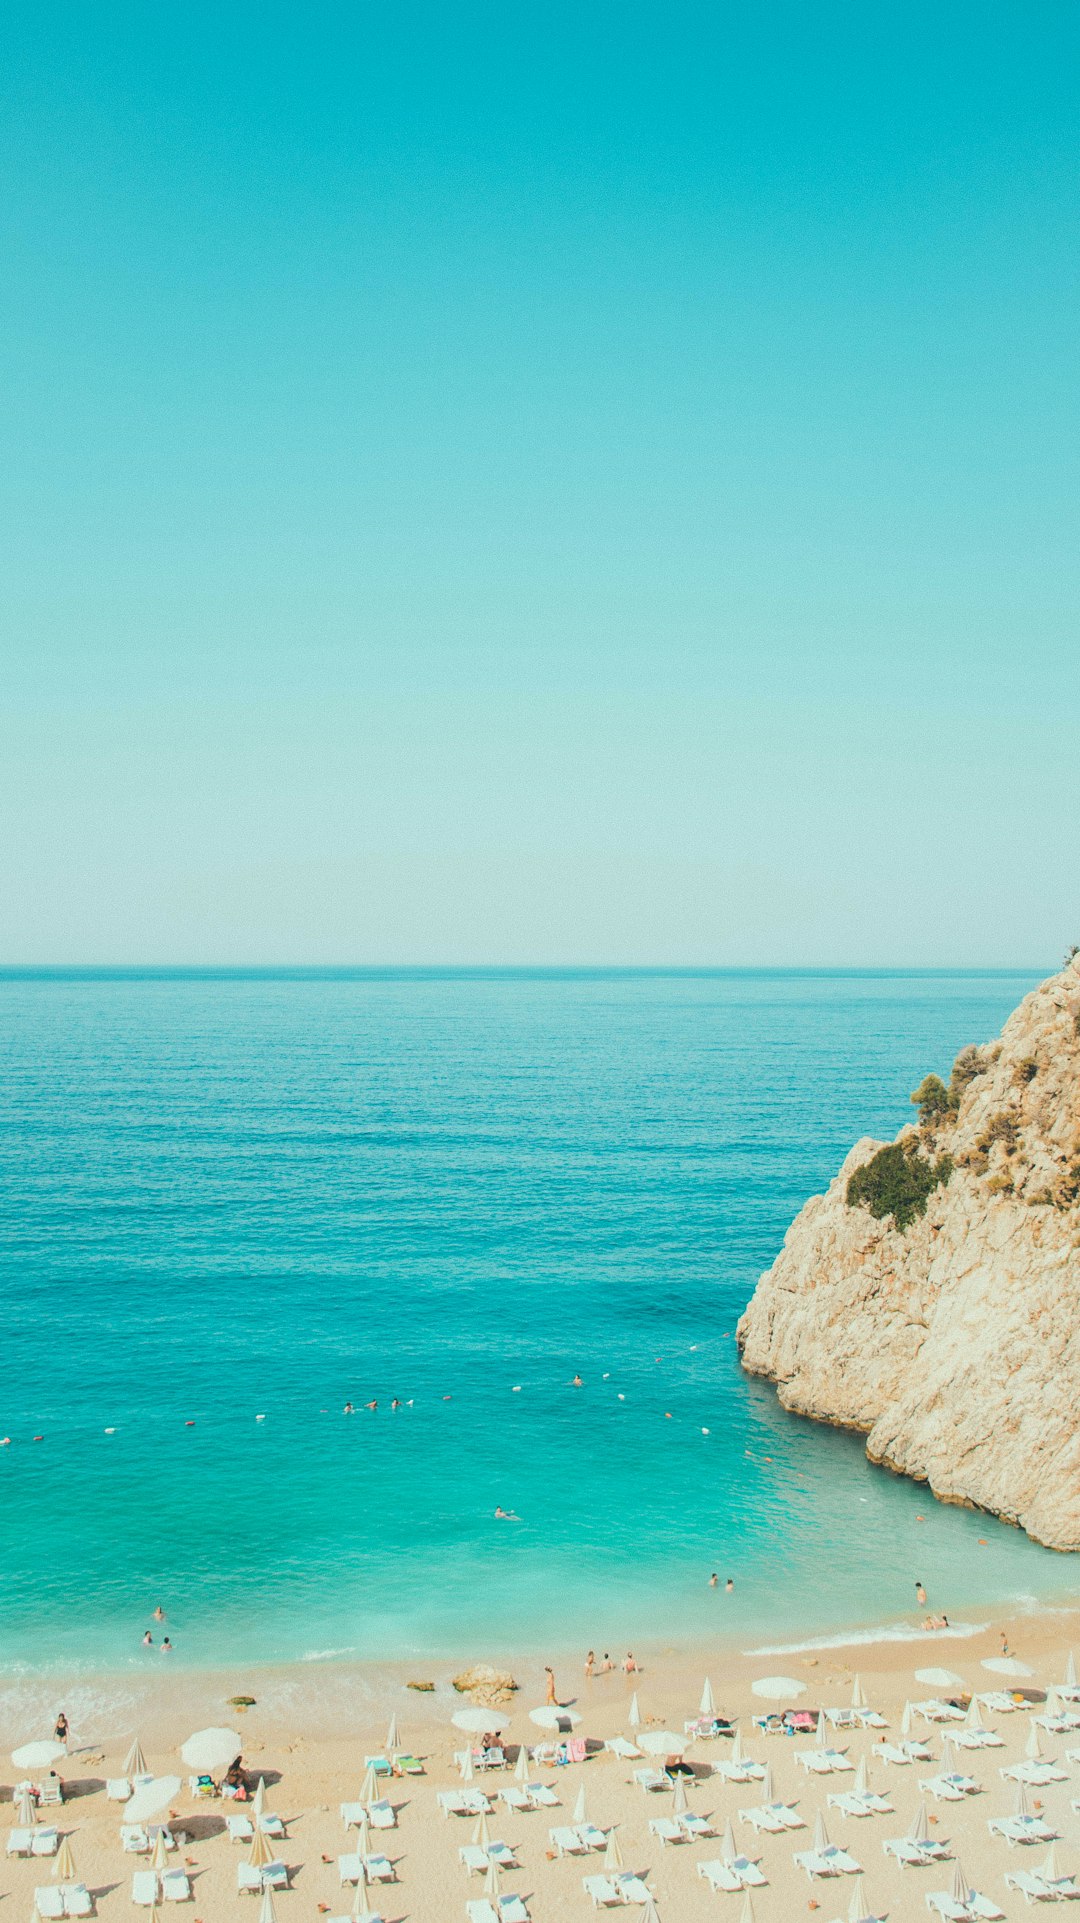 Beach Scenery Pictures | Download Free Images on Unsplash